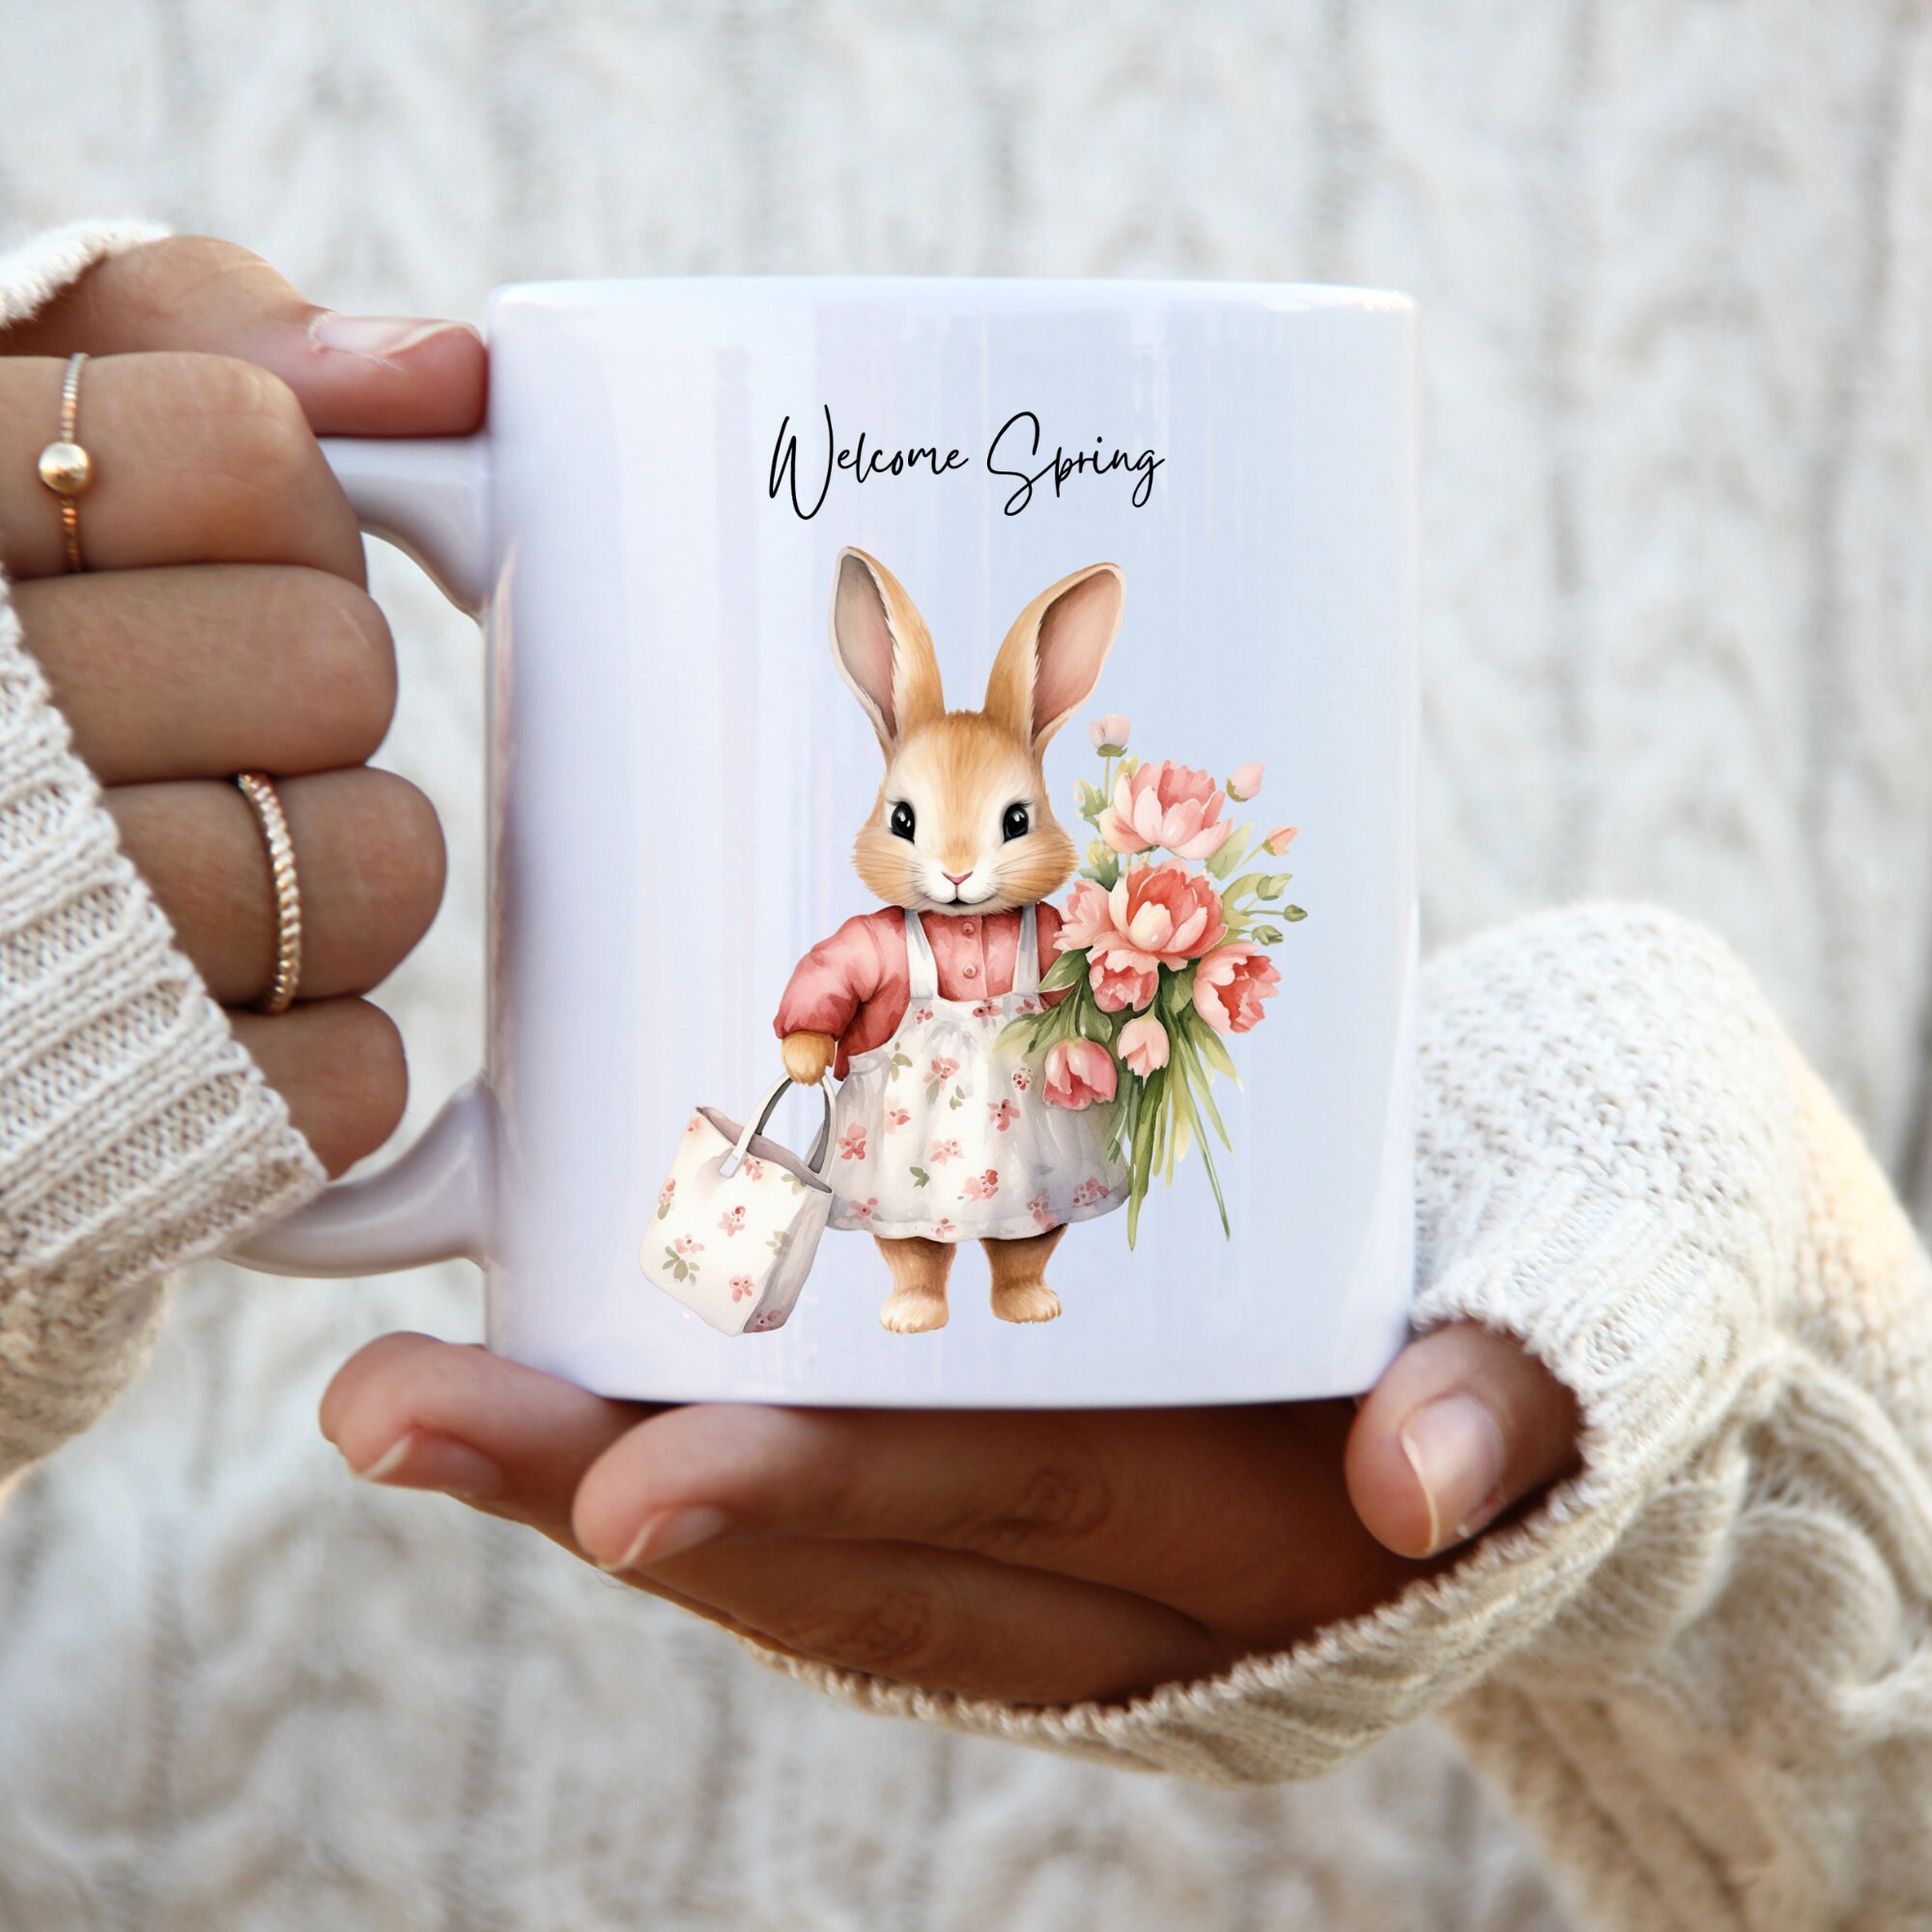 Welcome Spring PNG, Adorable Rabbit Carrying Flowers and Bag, Instant ...